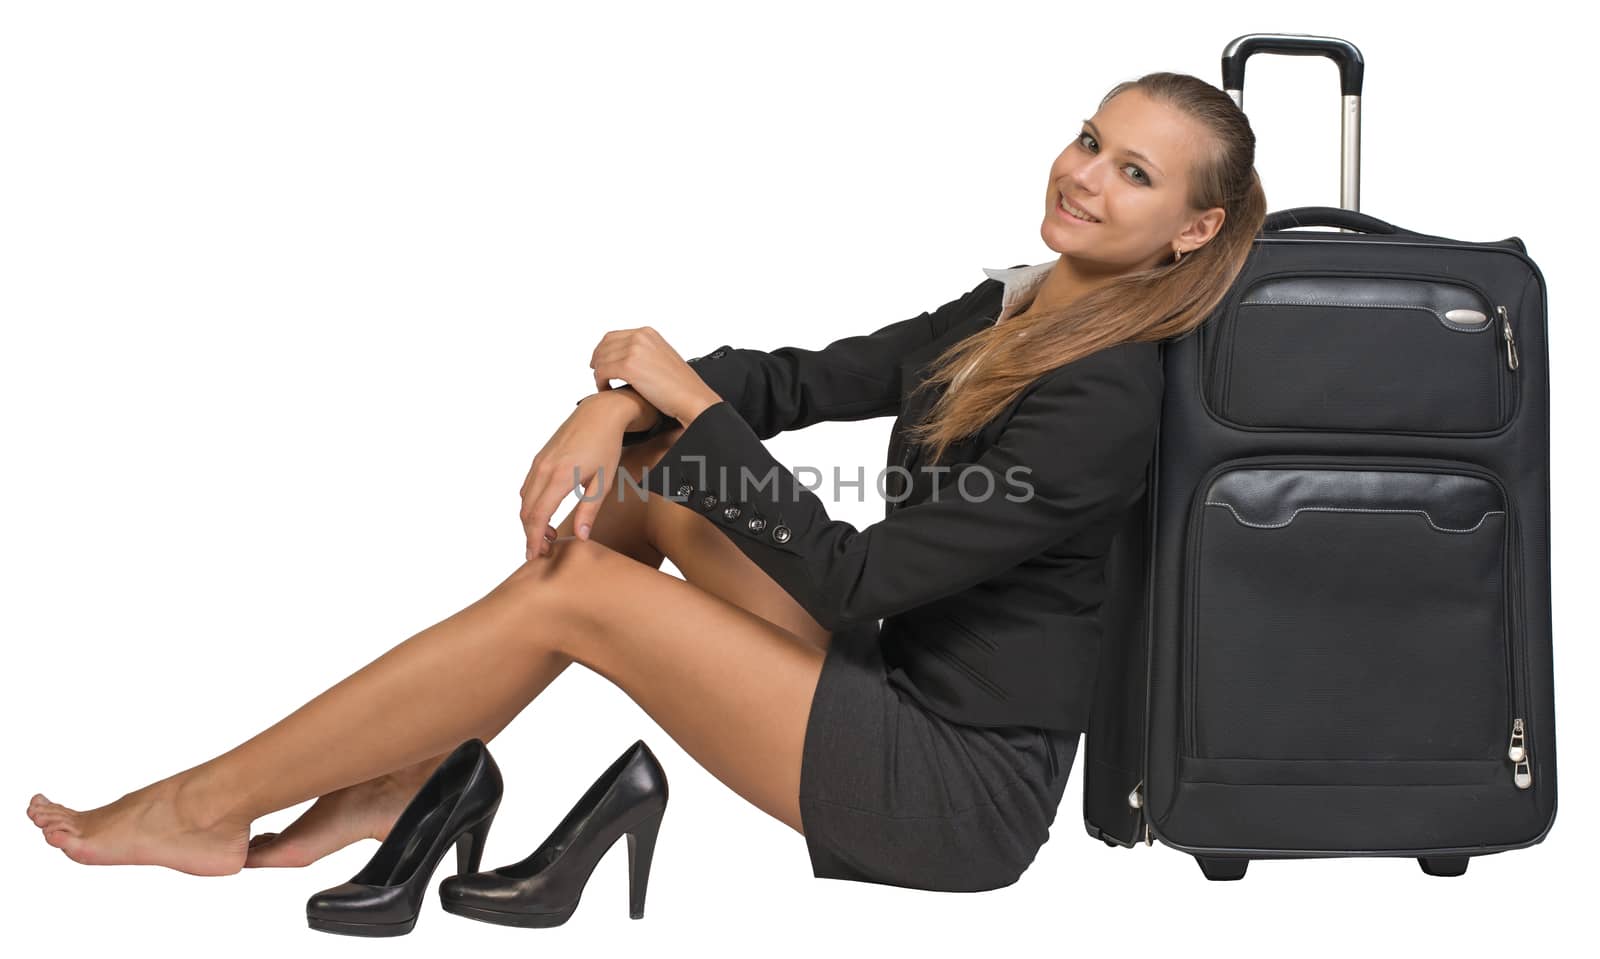 Businesswoman with her shoes off sitting next to front view suitcase by cherezoff